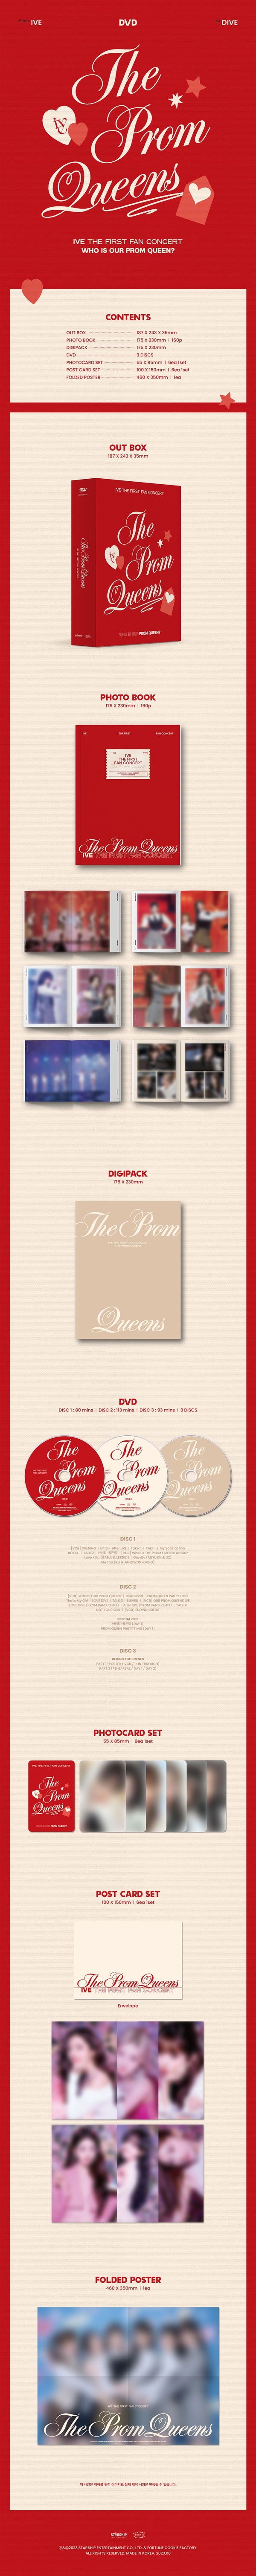 IVE THE FIRST FAN CONCERT DVD - THE PROM QUEENS